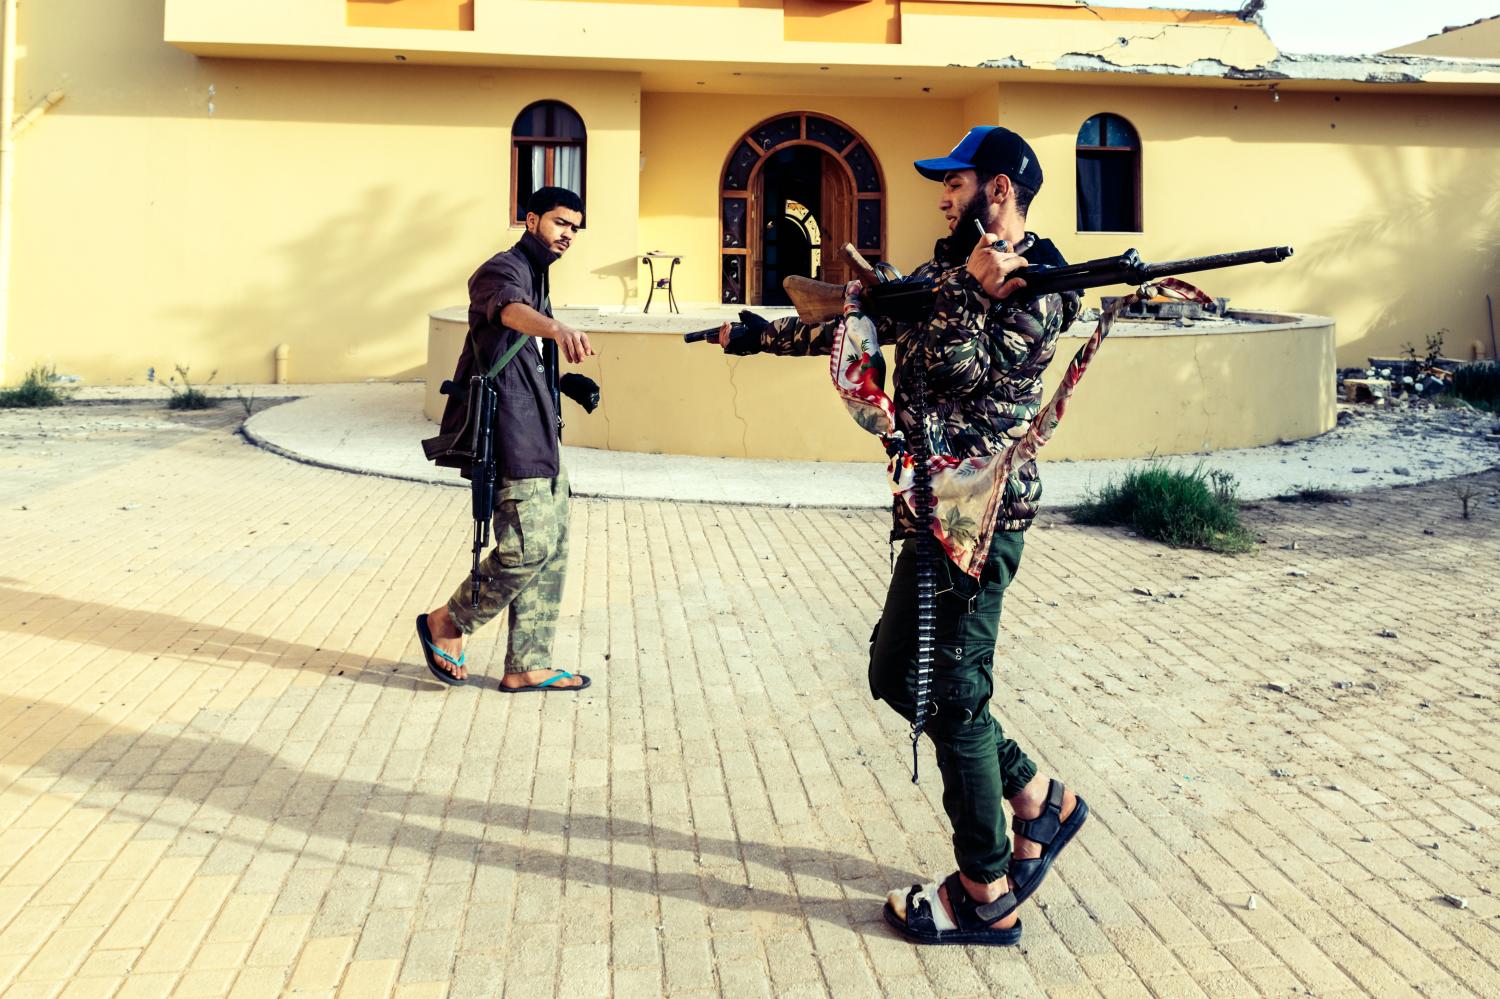 On the front line of Al Swani during the battle, two fighters of the 610 Brigade (GNA) are passing a revolver from hand to hand. Since April, the Libyan National Army (LNA) led by Khalifa Haftar is attempting to take control of Tripoli defended by the forces of UN-backed recognised Government of National Accord of Fayez el-Sarraj (GNA). Libya, outskirts of Tripoli, December 6, 2019.Sur la ligne de front de Al Swani pendant les combats, deux combattants de la brigade 610 (GAN) se passe un revolver de la main a la main. Depuis avril, l'armee nationale Libyenne (LNA) dirigee par Khalifa Haftar essaie de prendre le control de Tripoli defendu par les forces du gouvernement d'accord national de Fayez al-Sarraj, soutenu par l'onu (GAN). Libye, banlieue de Tripoli, 6 decembre 2019.NO USE FRANCE